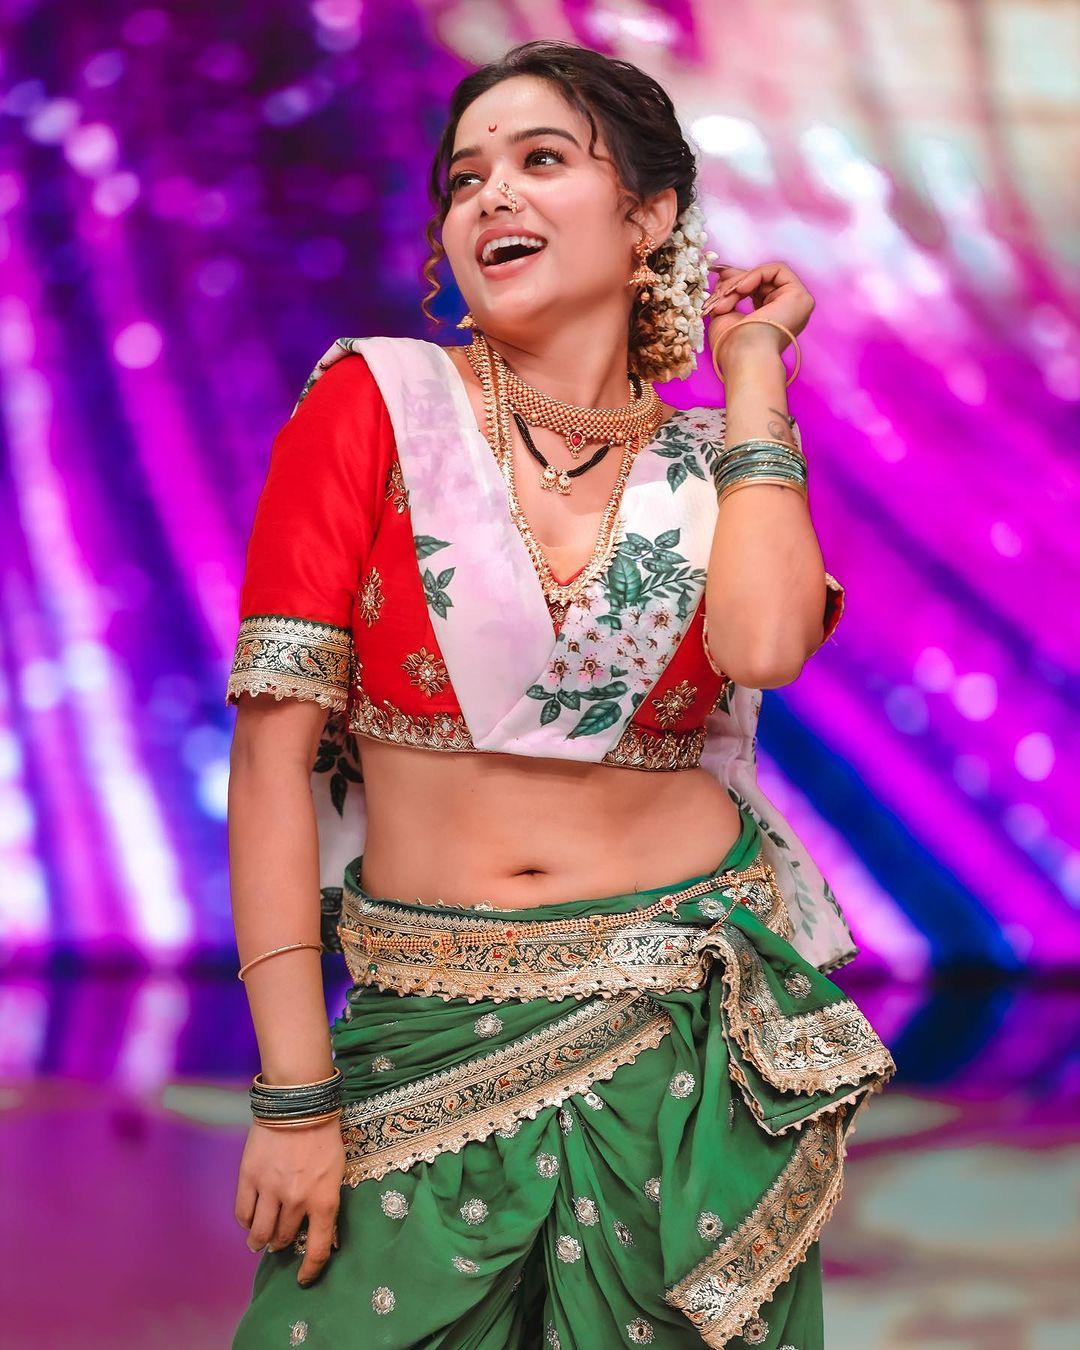 When Manisha performed a Lavani dance on the song 